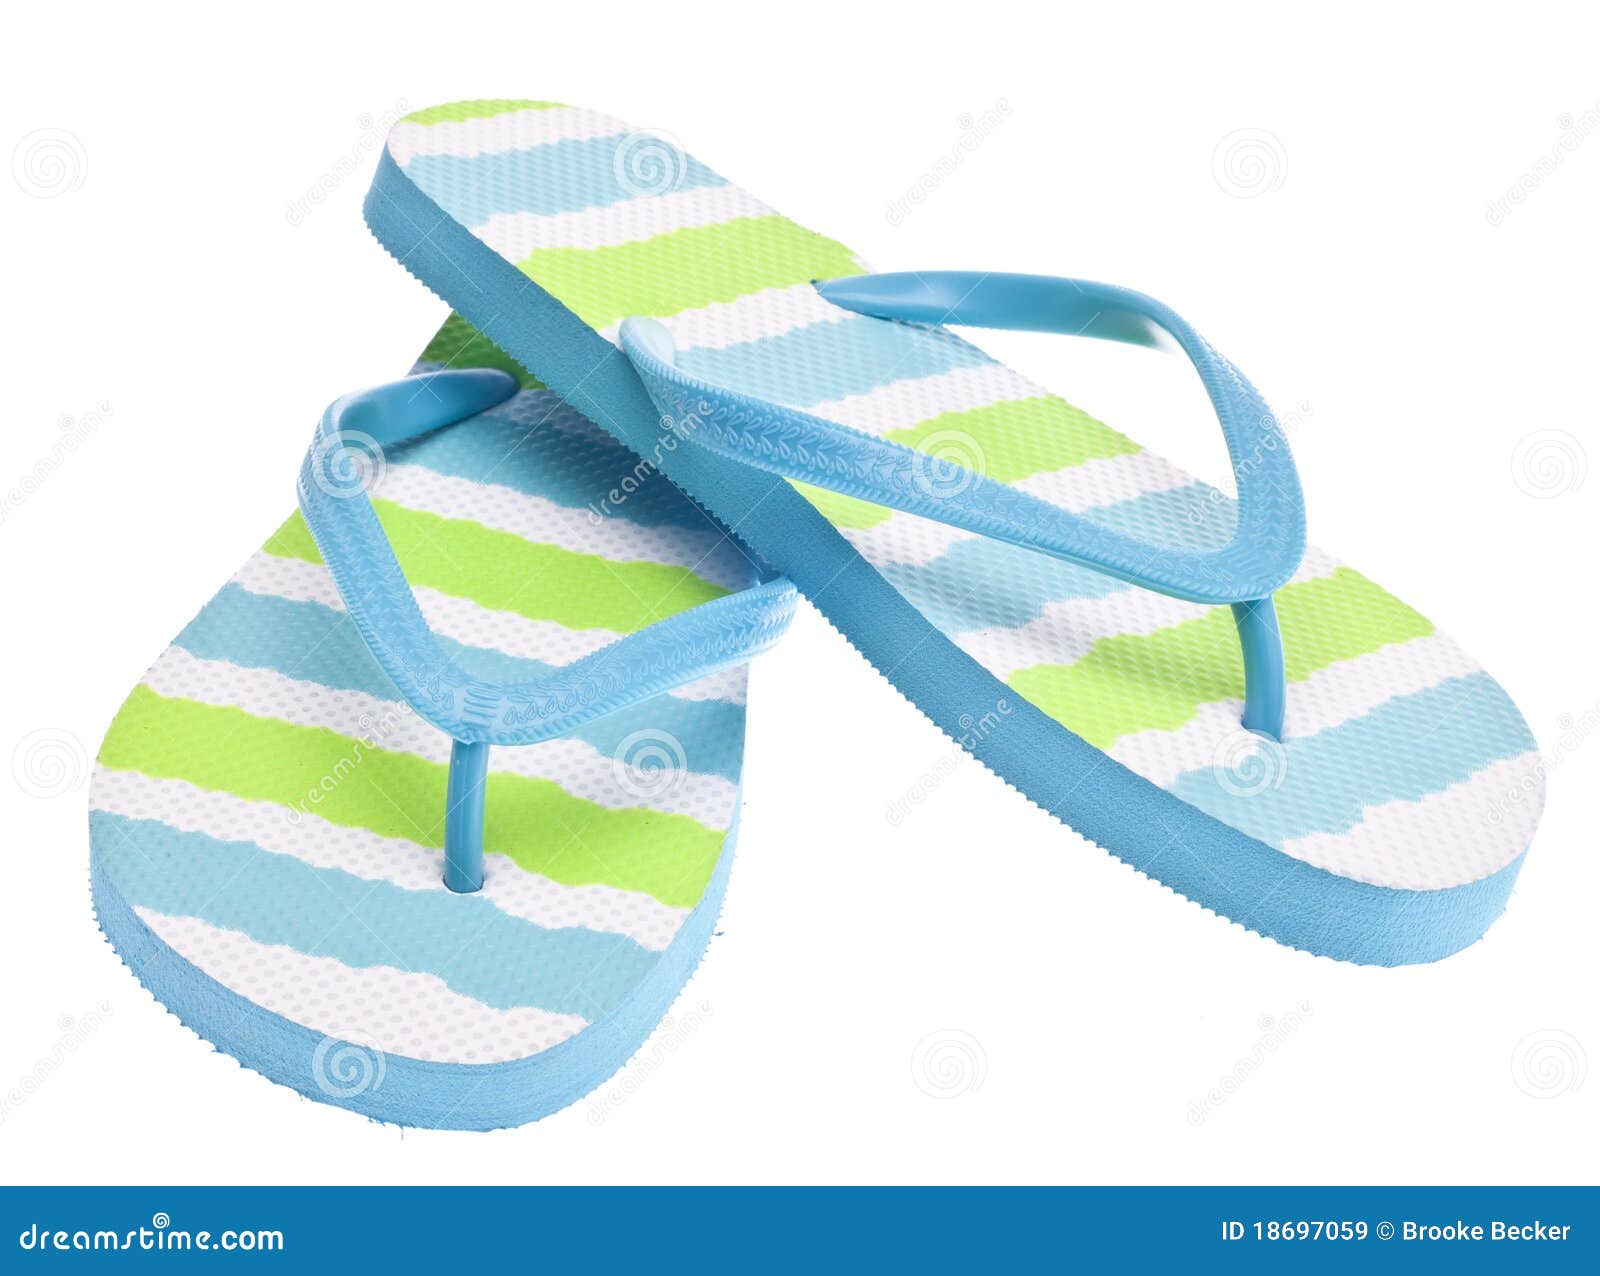 Blue And Green Flip Flop Sandals Royalty Free Stock Images - Image ...